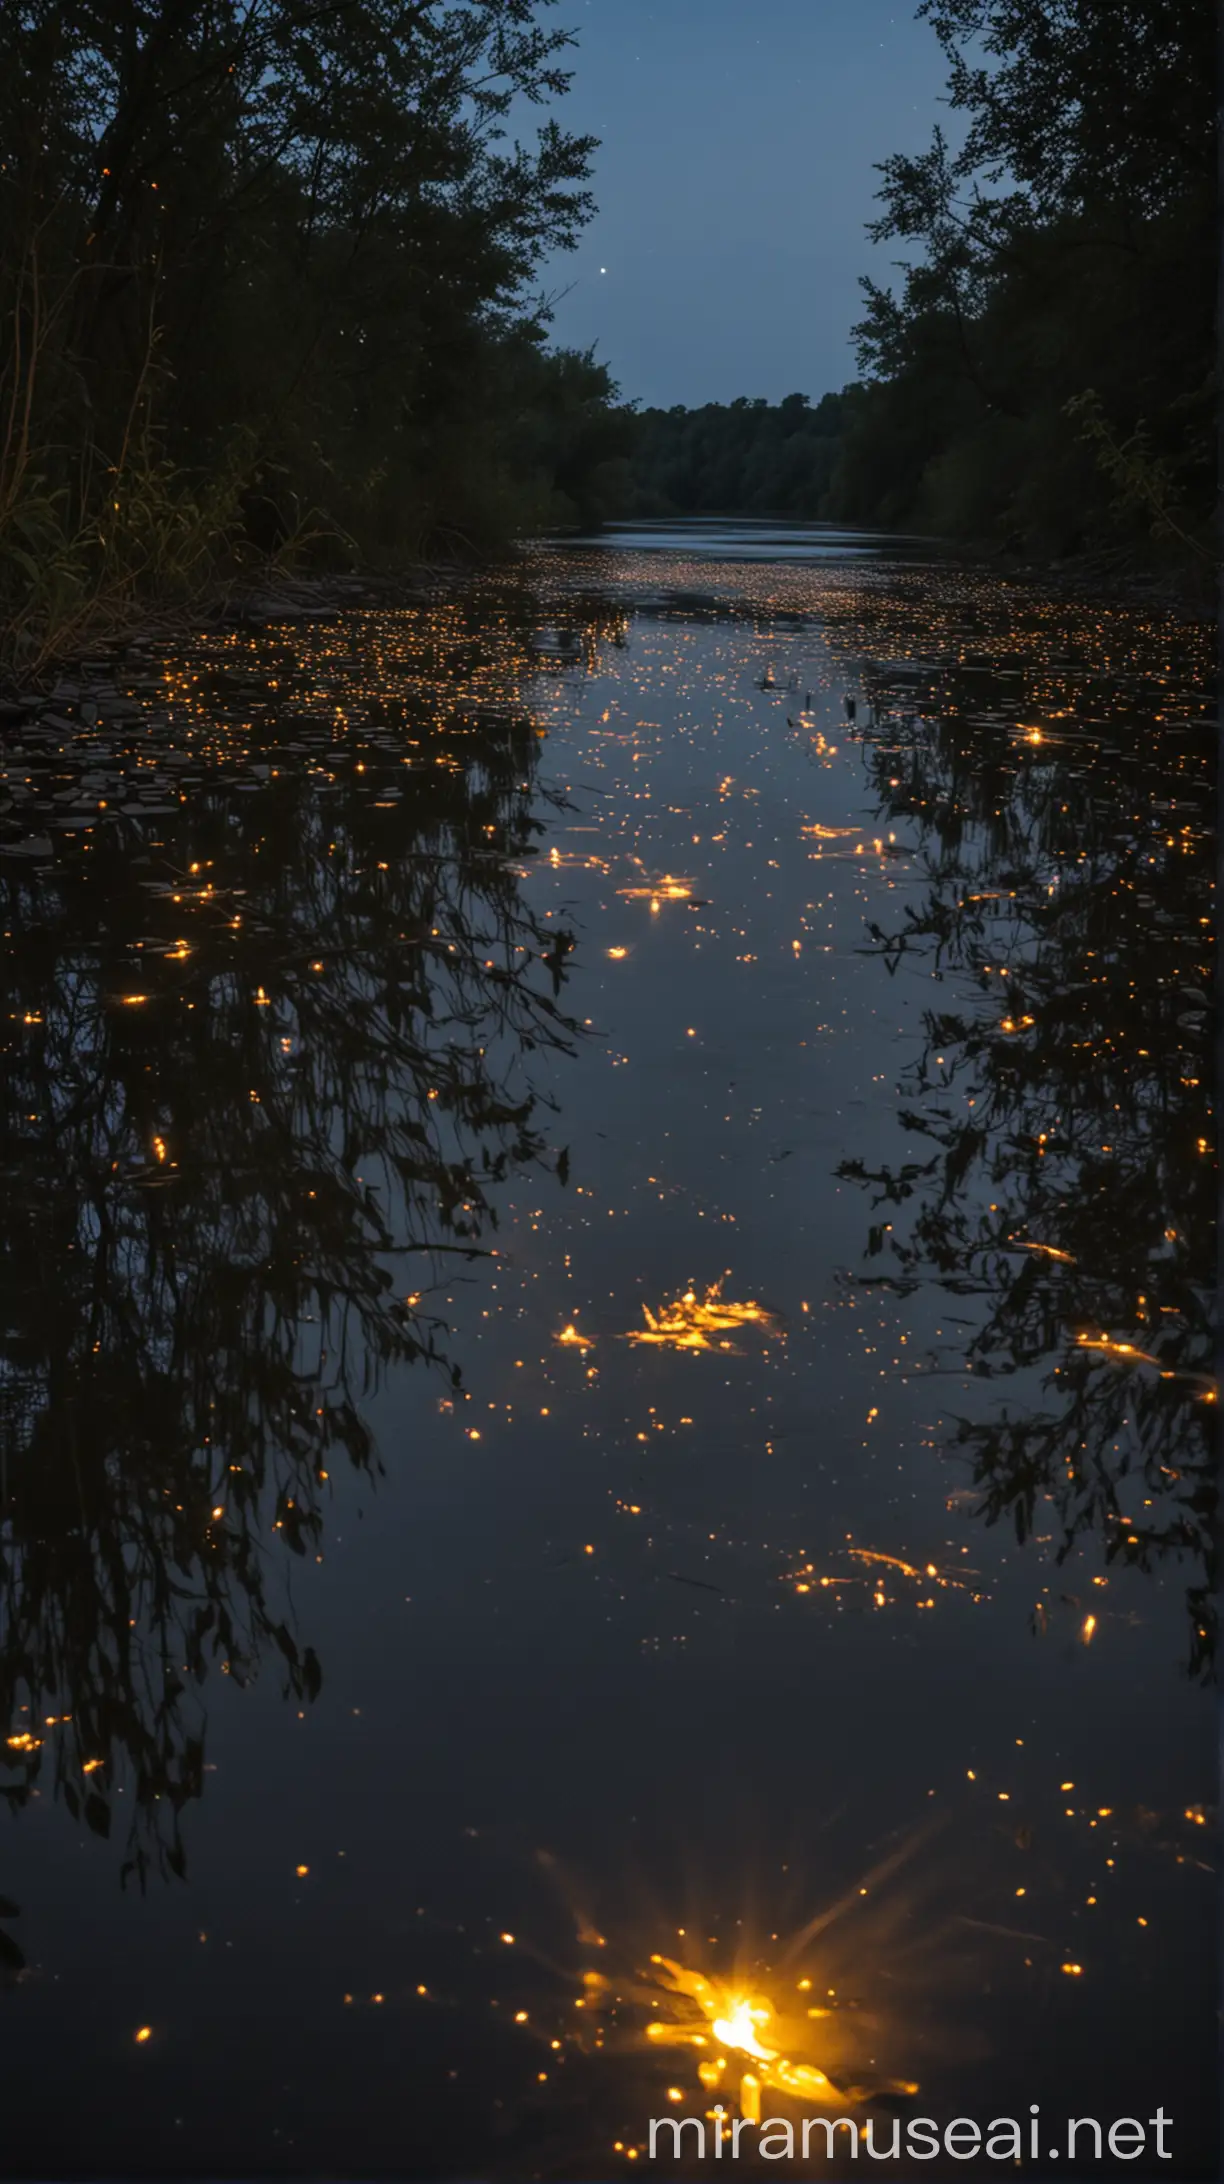 Fireflies Night by the Big River Bank